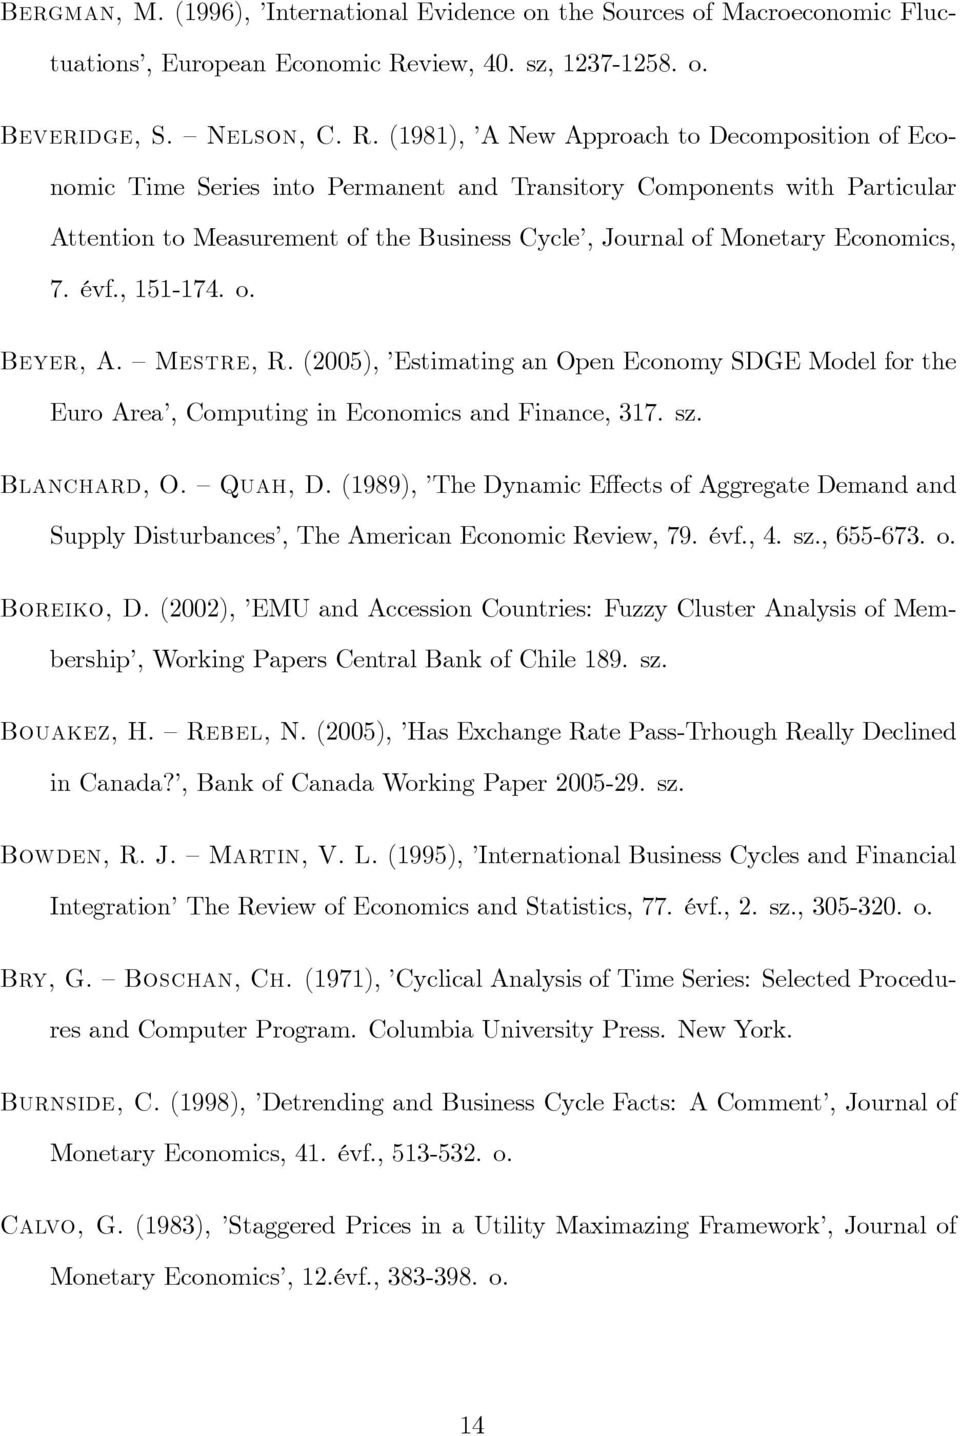 (1981), A New Approach to Decomposition of Economic Time Series into Permanent and Transitory Components with Particular Attention to Measurement of the Business Cycle, Journal of Monetary Economics,